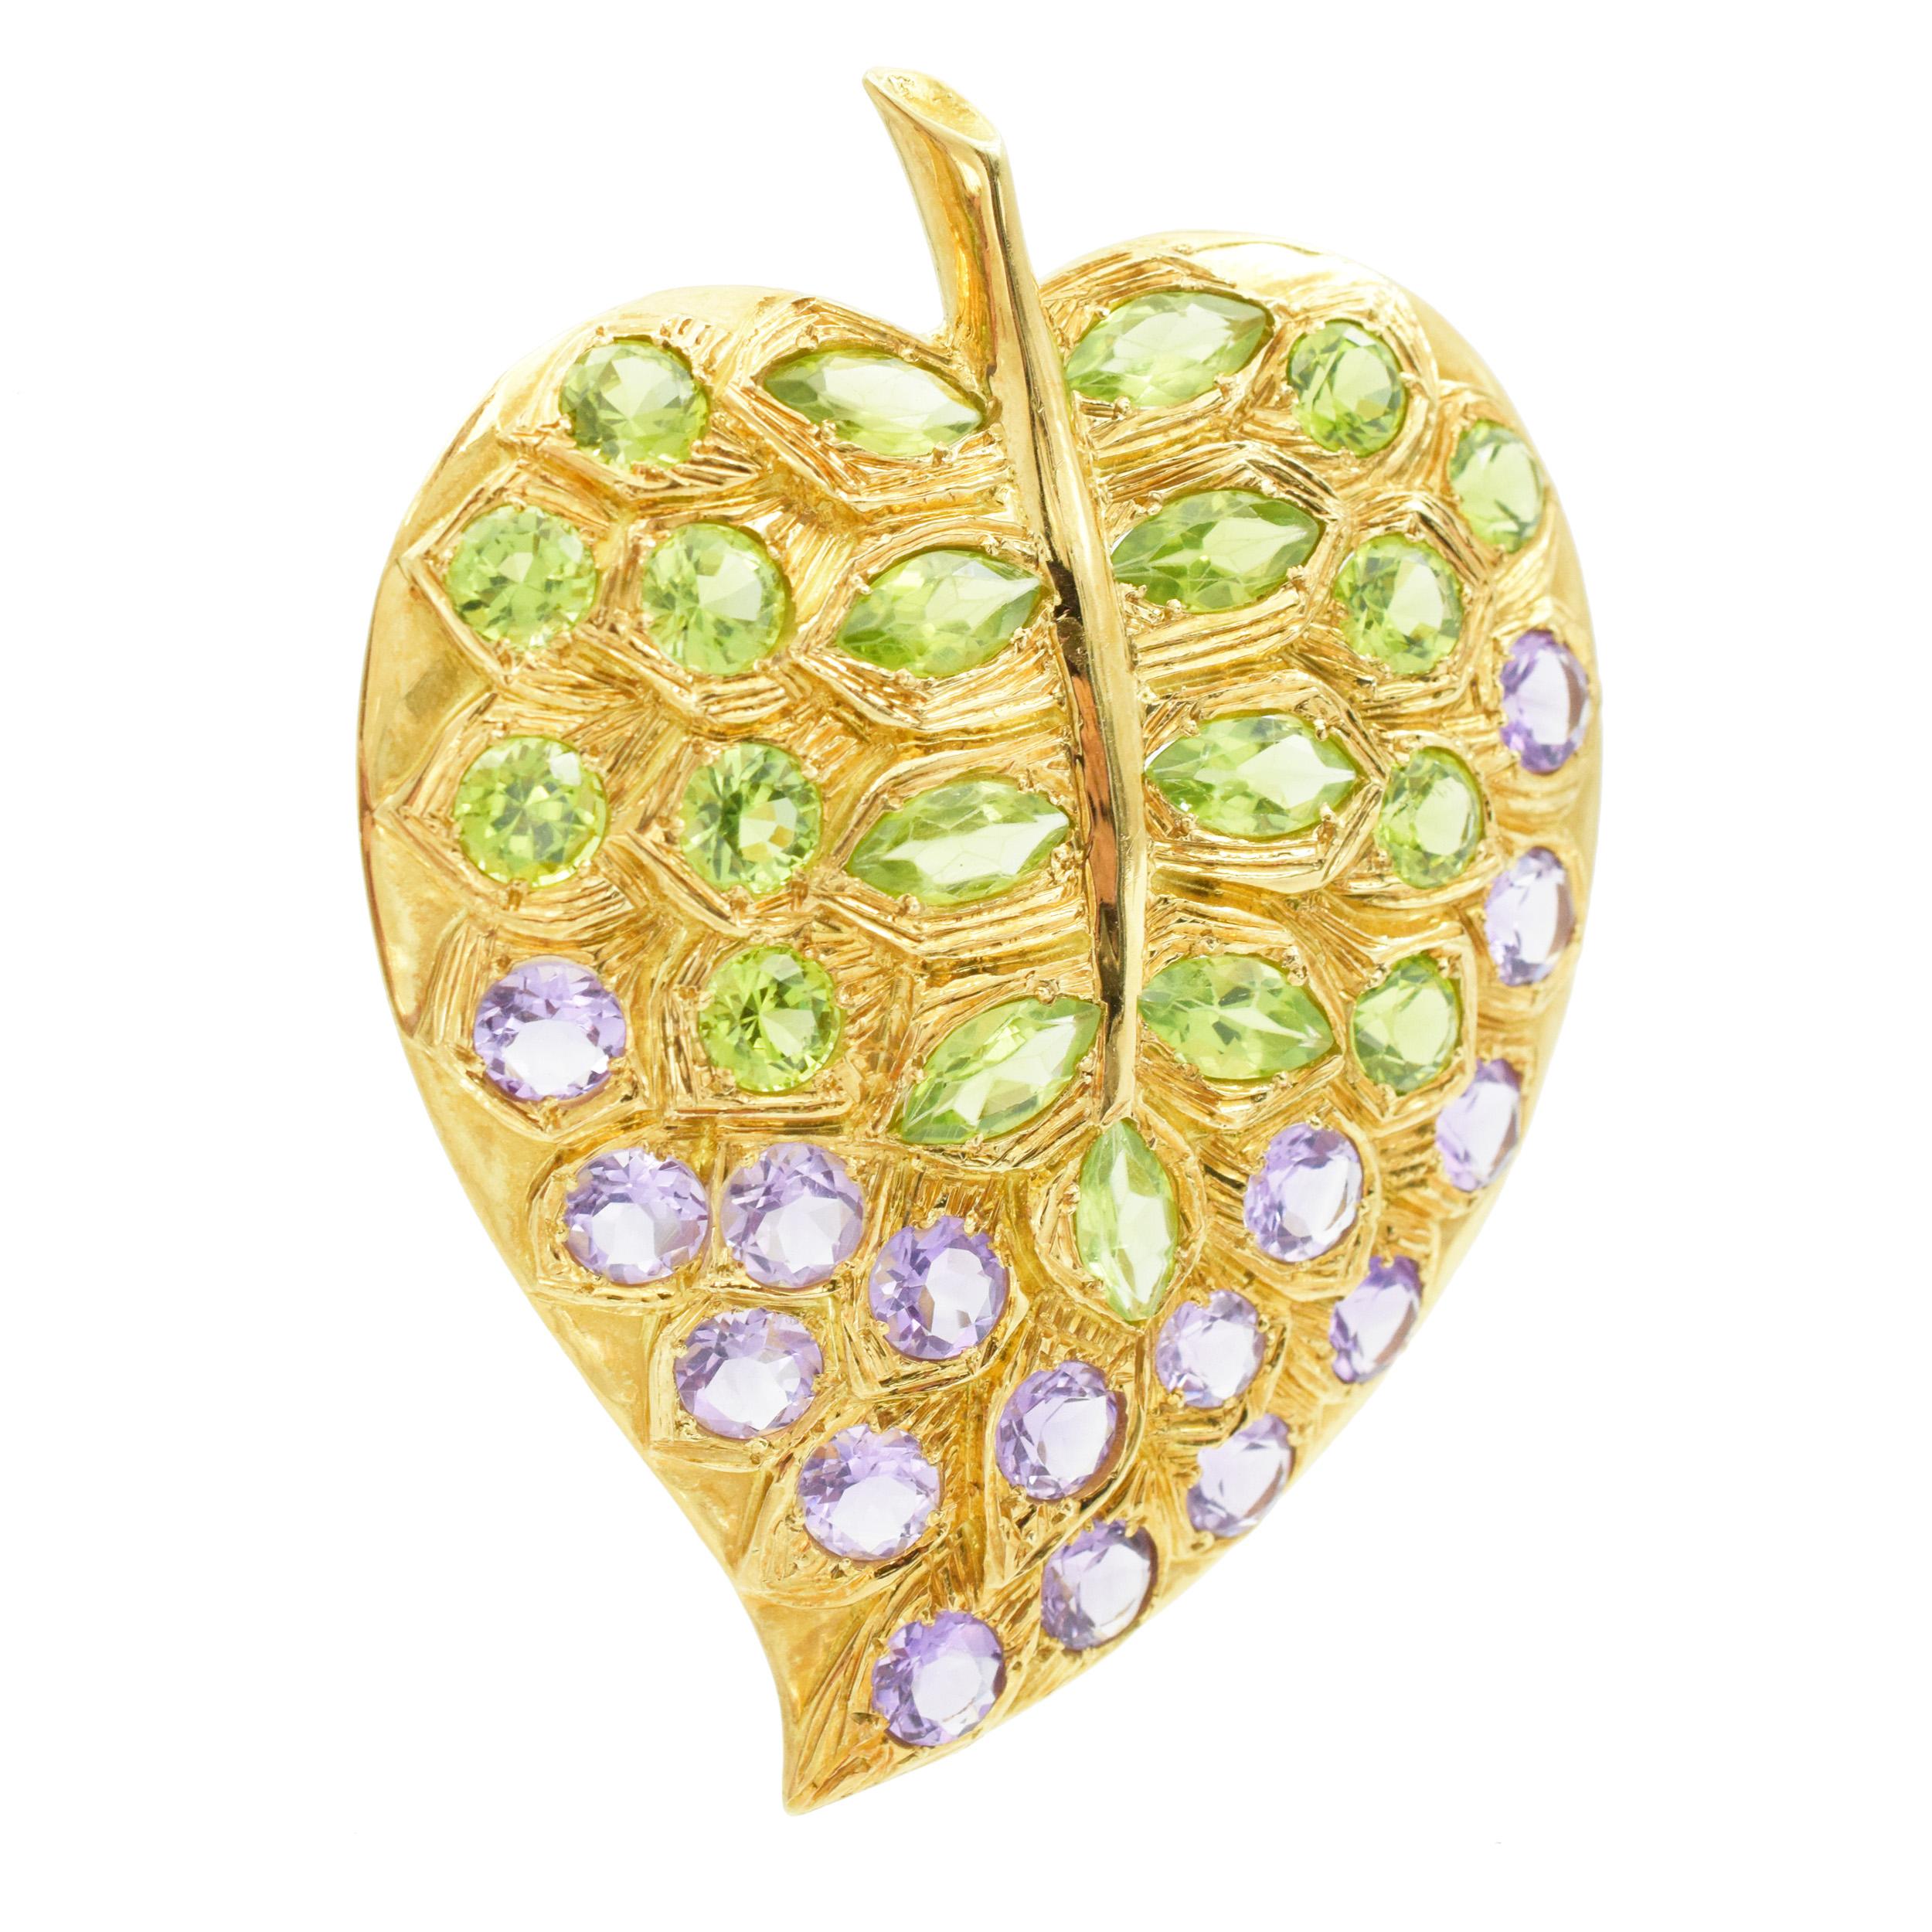 Pair of Amethyst and Peridot Leaf Brooches For Sale 3